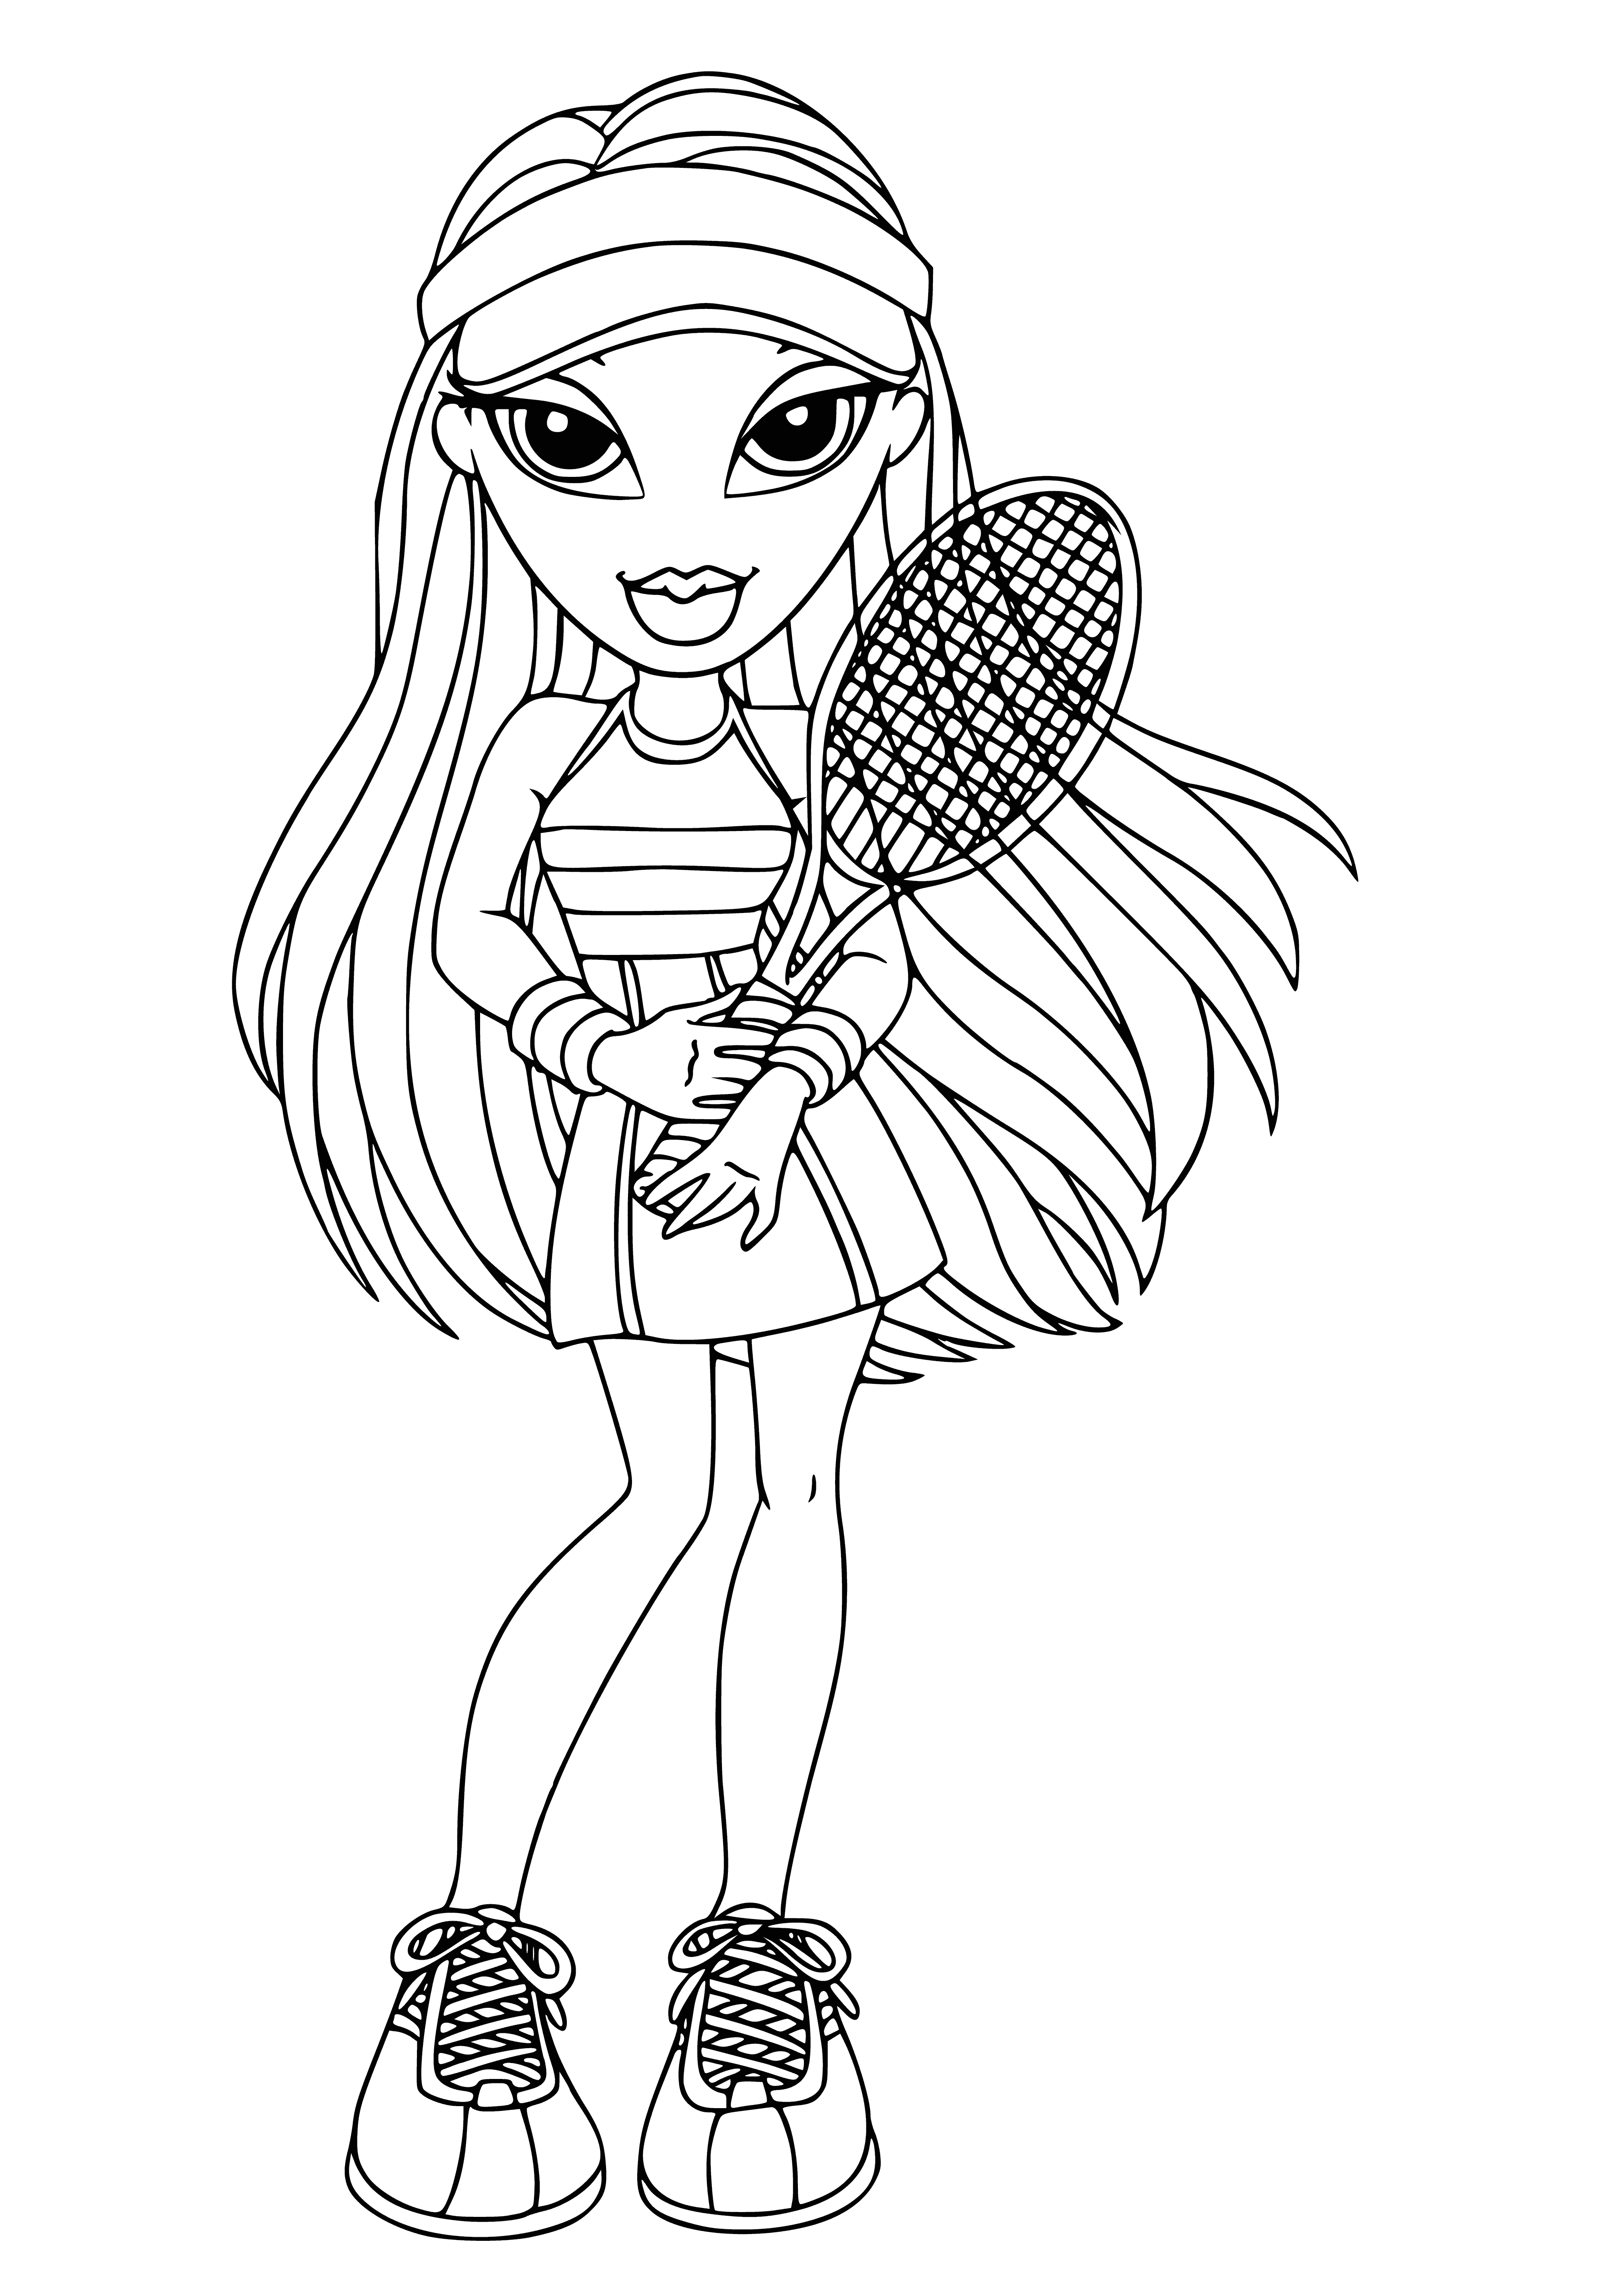 coloring page: Vinessa is a Bratz doll with black hair, eyes, leggings and sneakers. She stands with arms crossed in front of a hot pink backdrop.